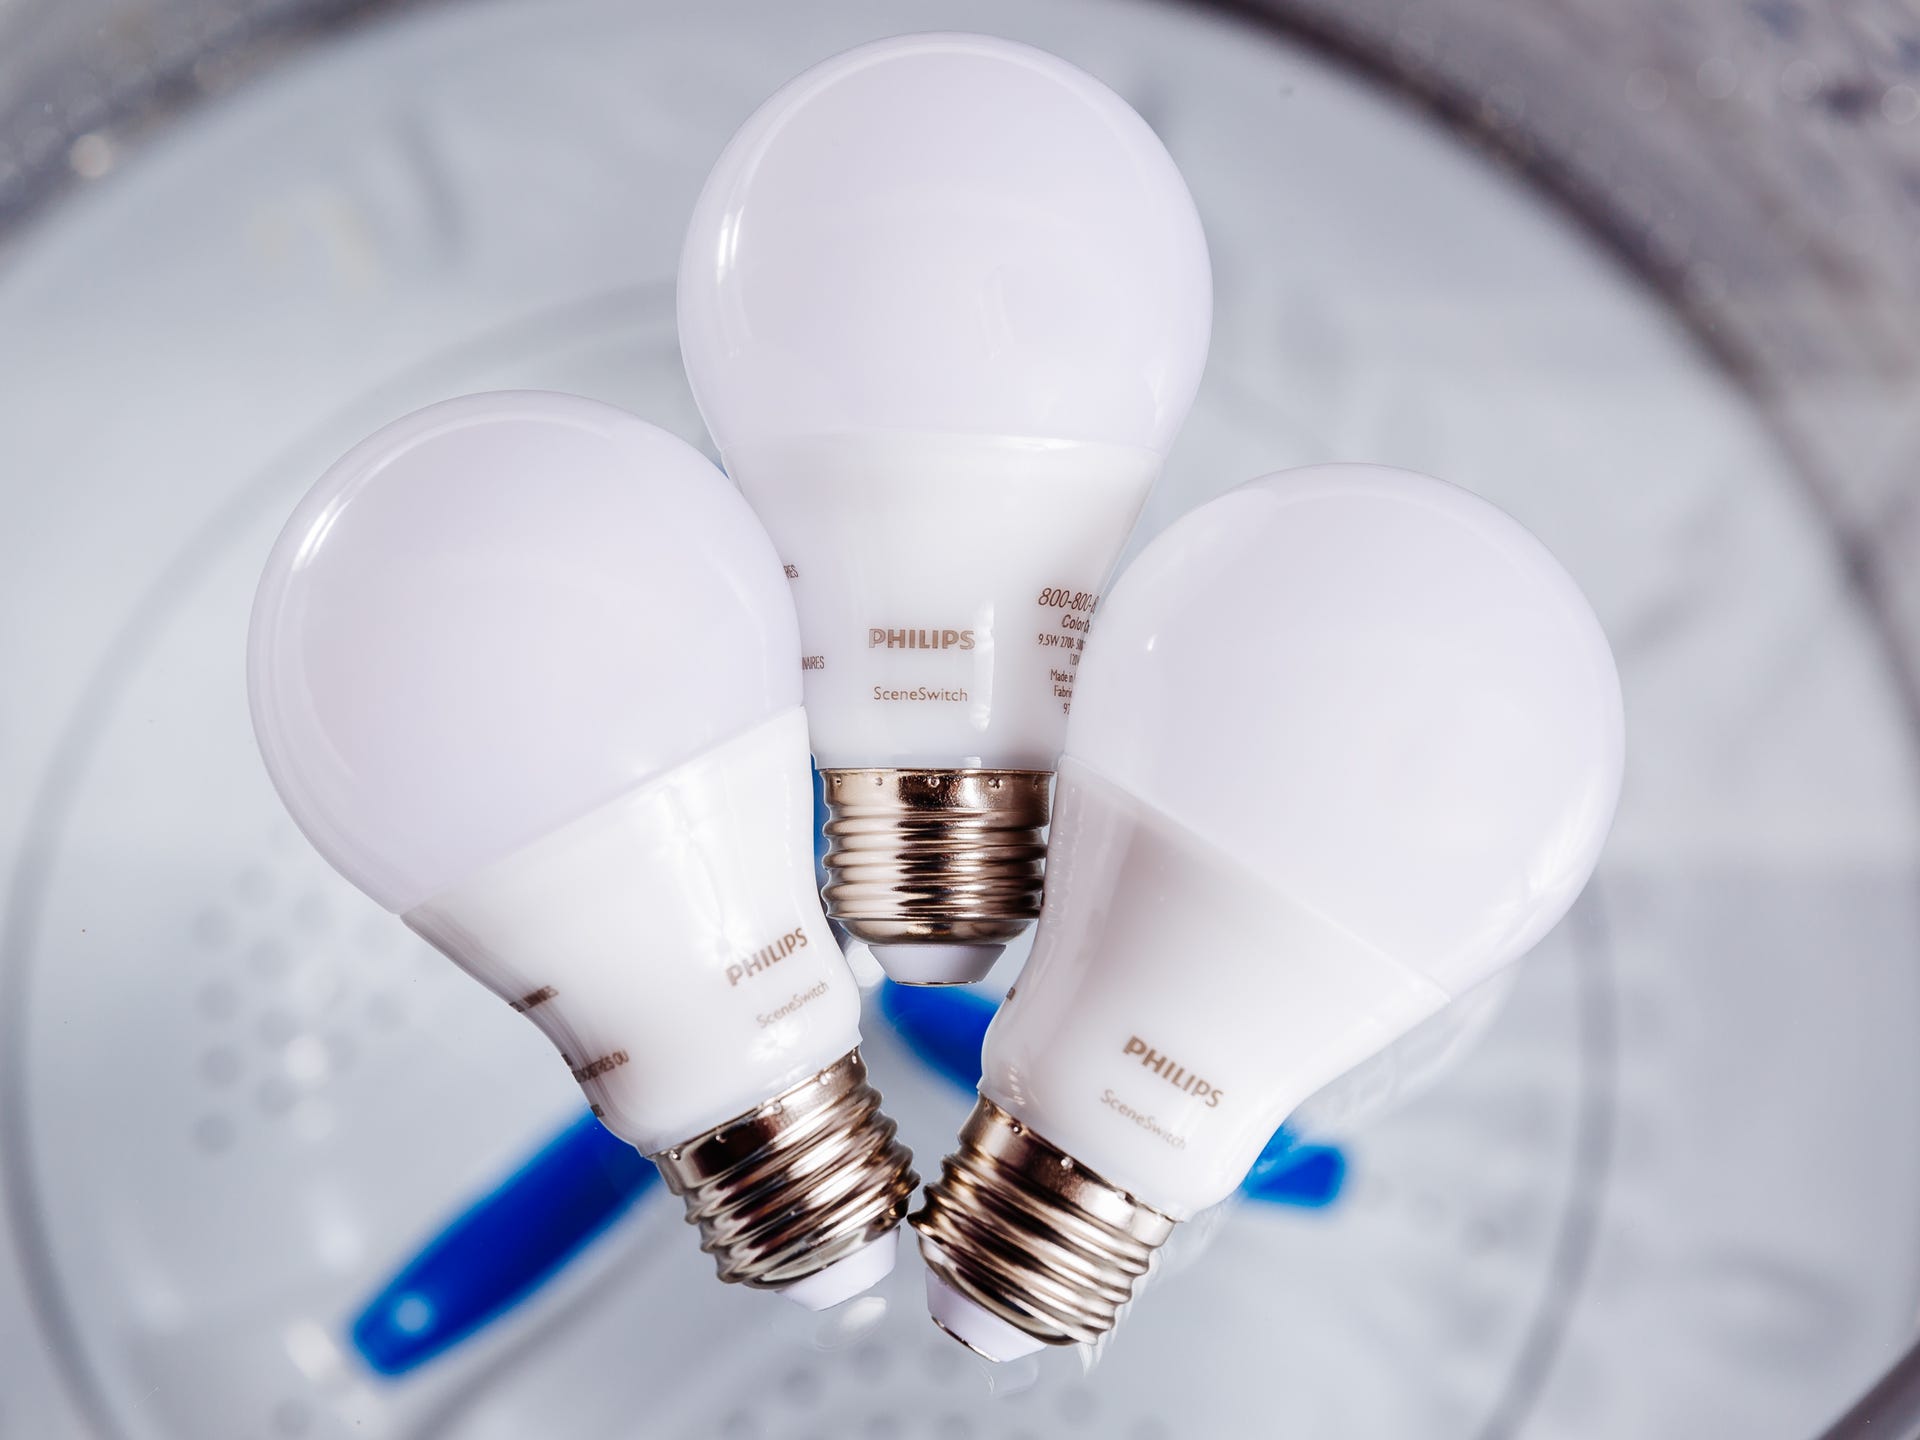 Philips Equivalent LED review: These Editors' Choice-winning LED bulbs can dim without - CNET